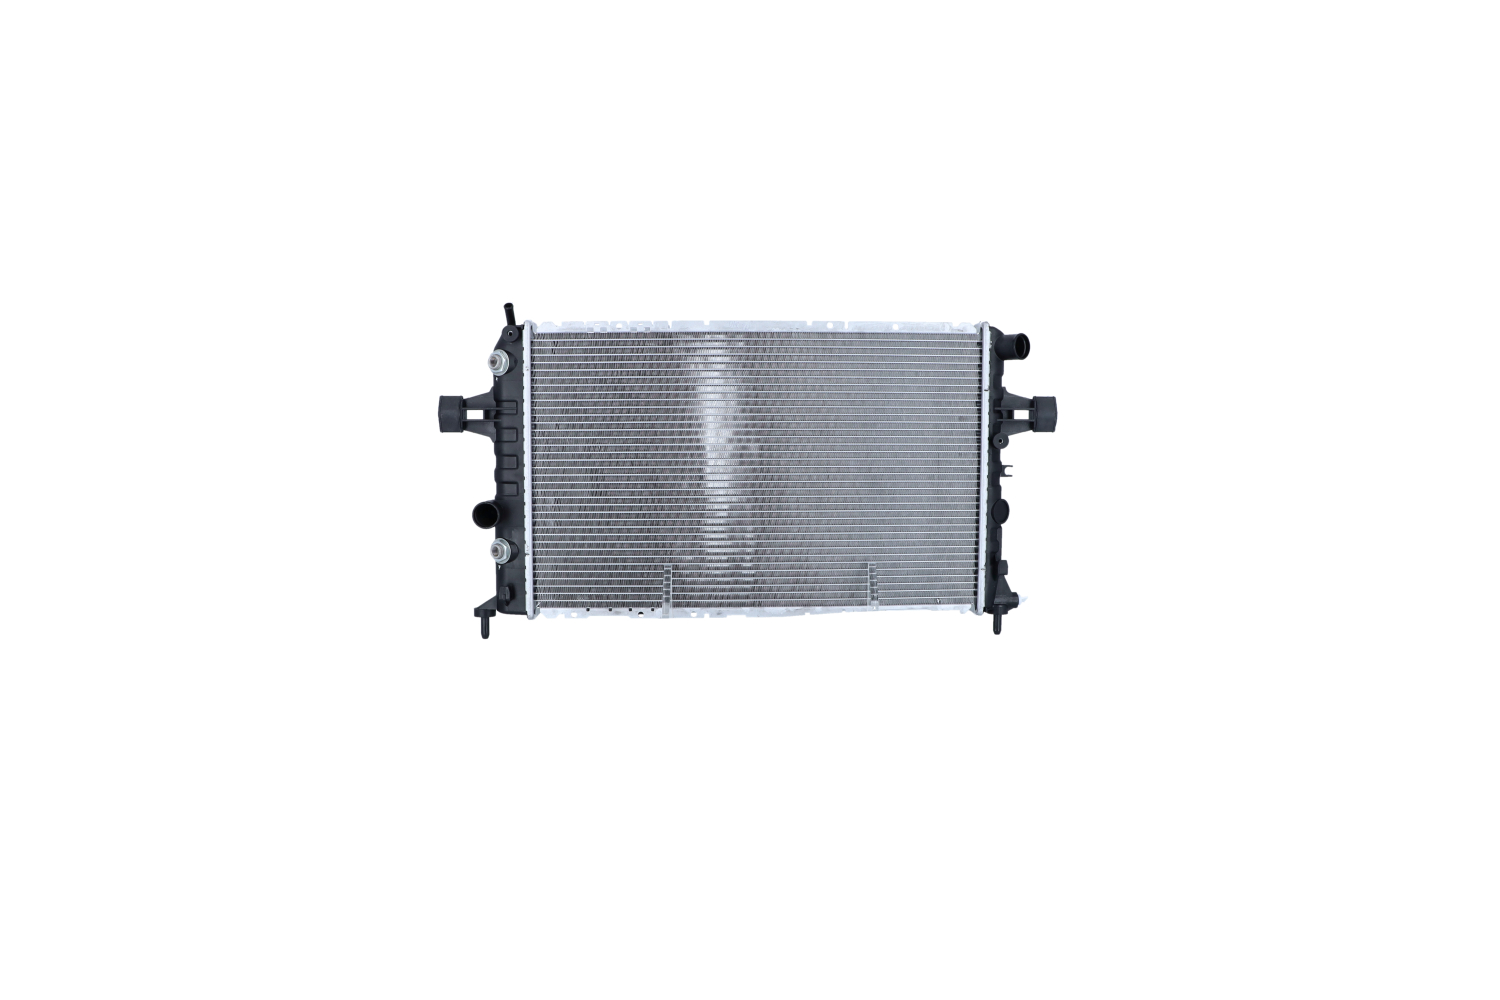 NRF EASY FIT 55351 Engine radiator Aluminium, 600 x 366 x 42 mm, with rubber grommet, Brazed cooling fins